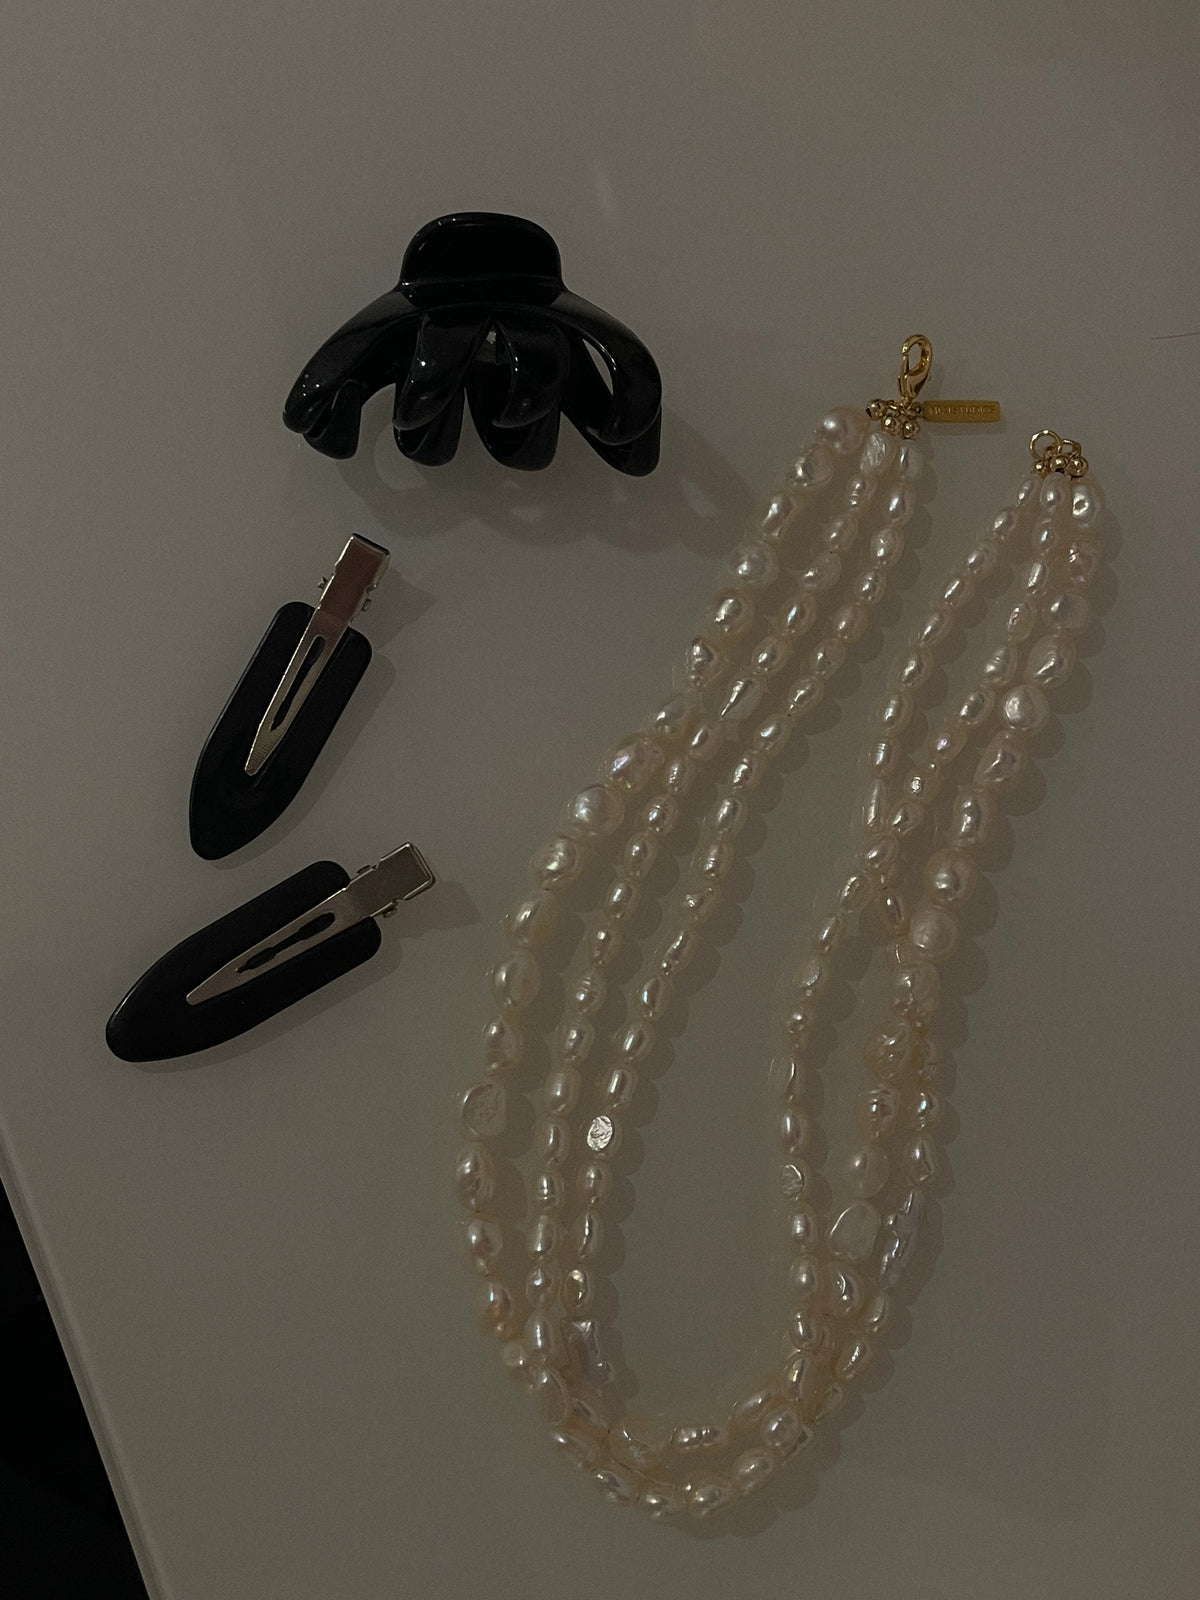 SULI FRESHWATER PEARL NECKLACE